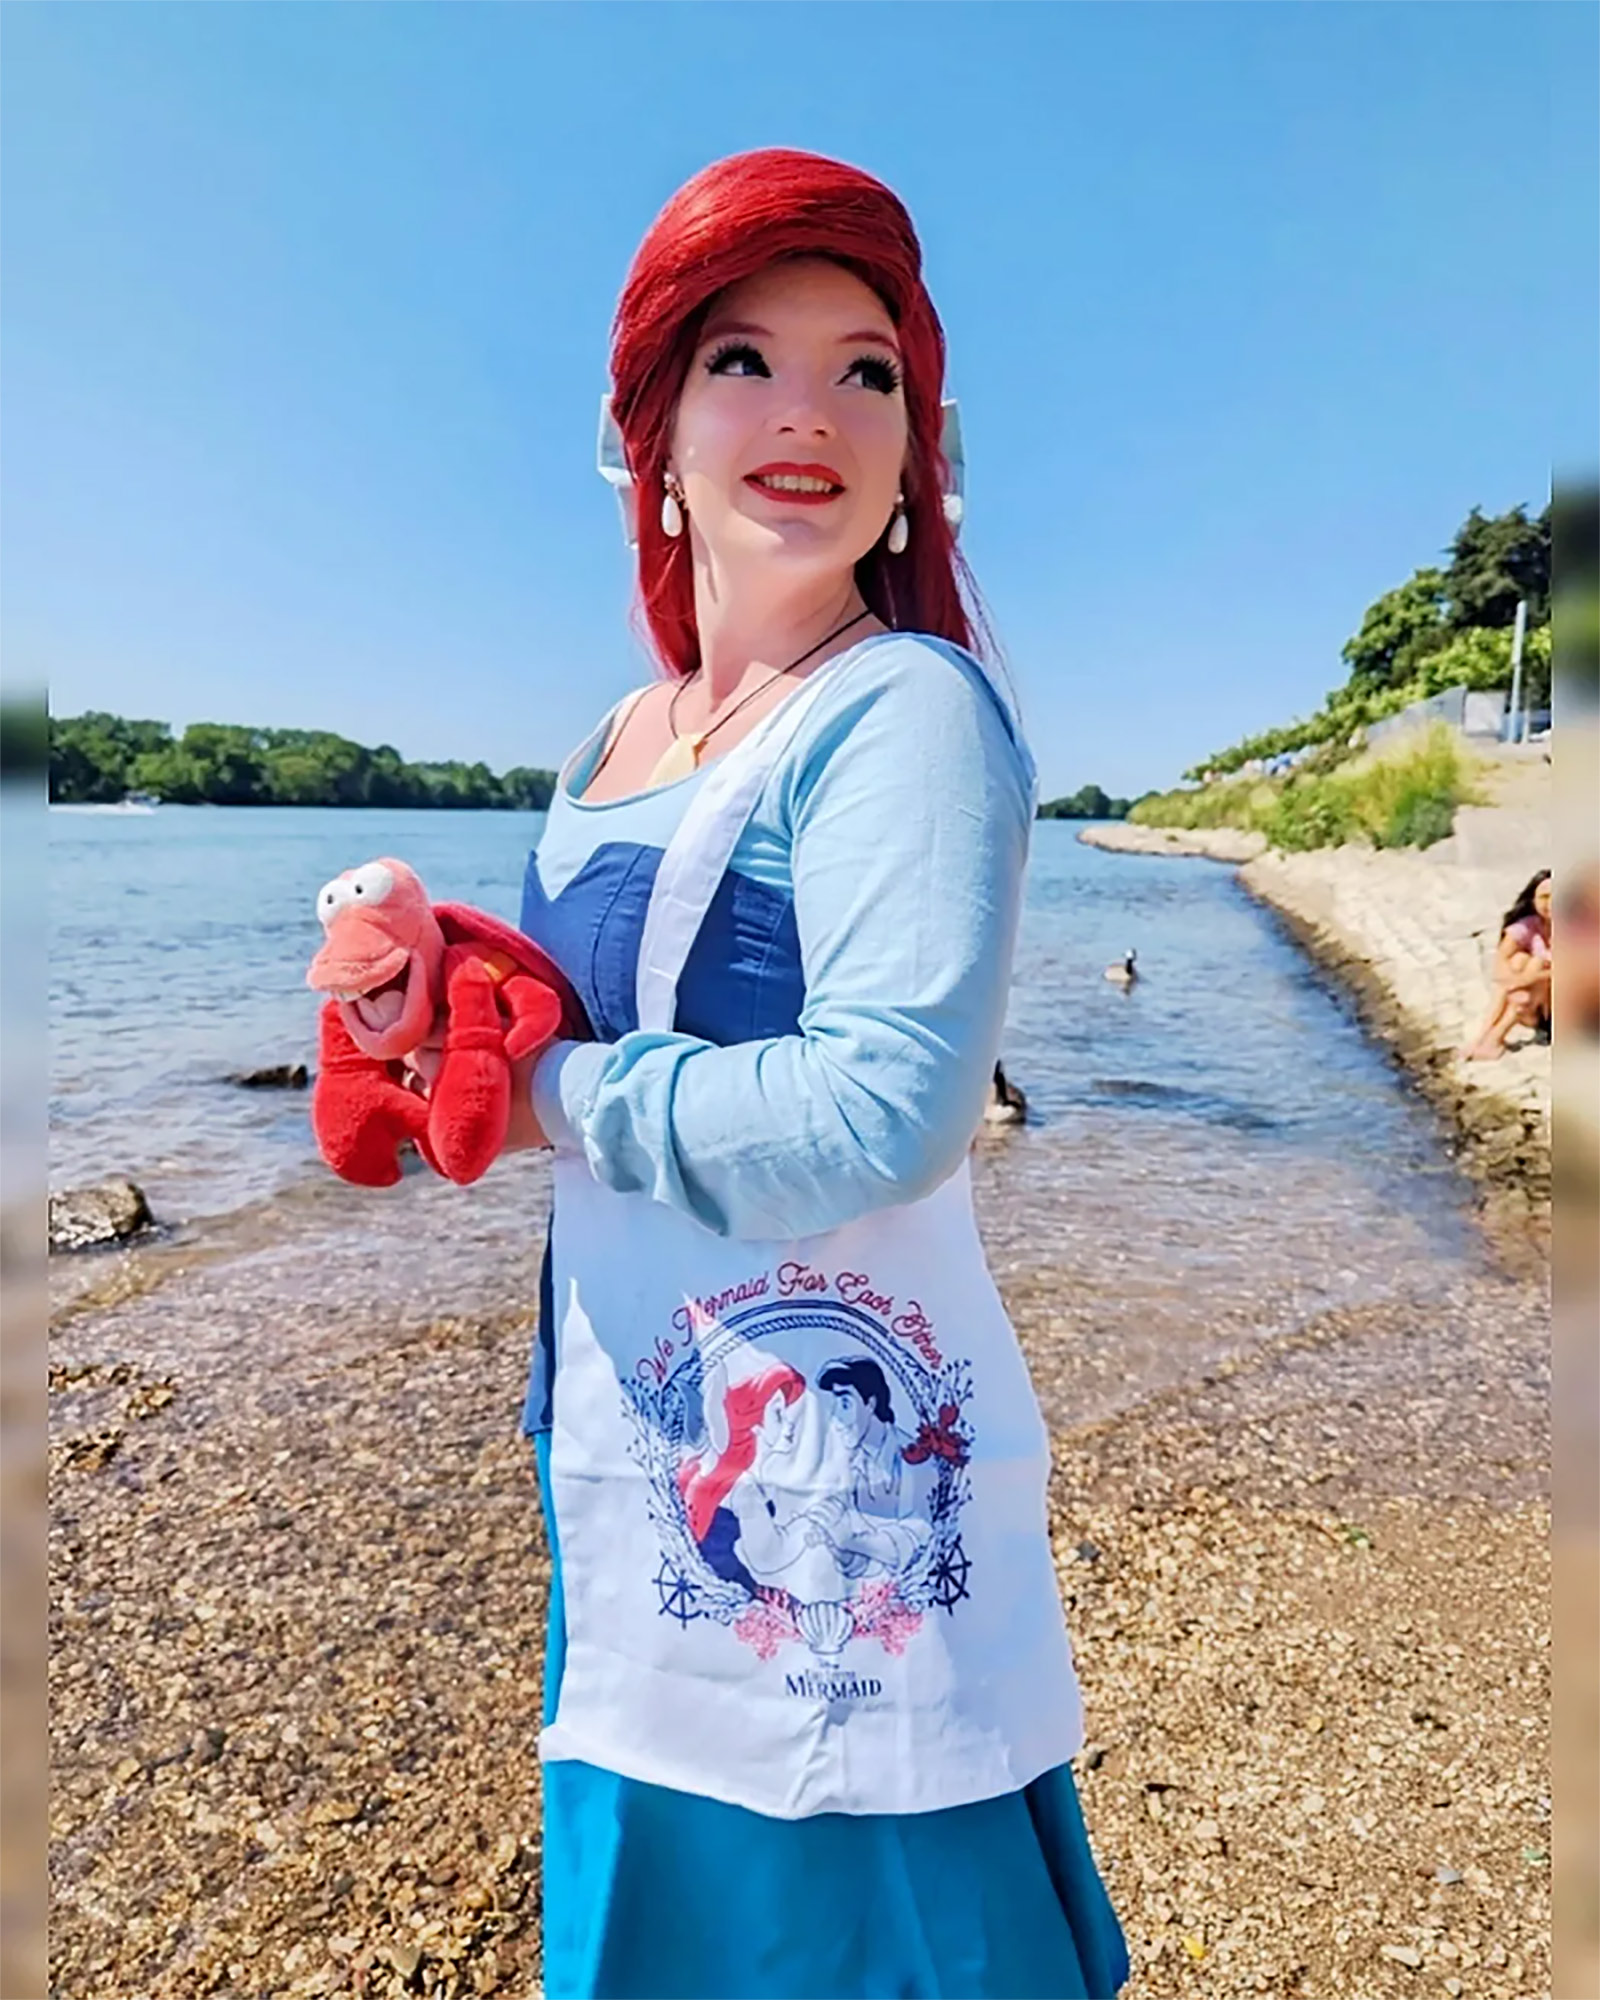 Ariel - We Mermaid for Each Other tote bag white